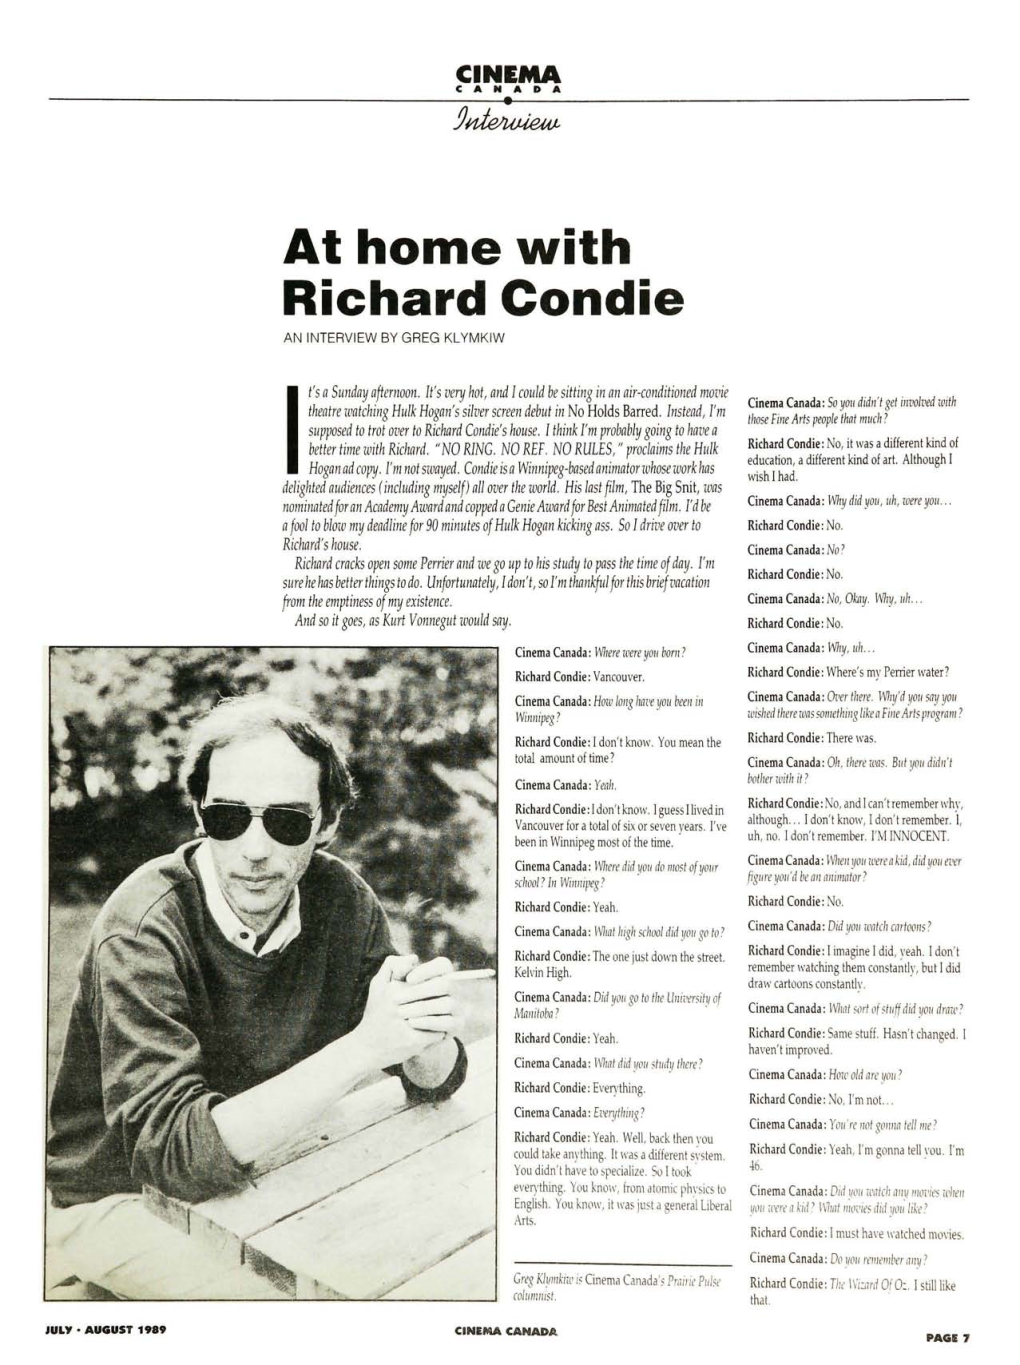 At Home with Richard Condie an INTERVIEW by GREG KL YMKIW